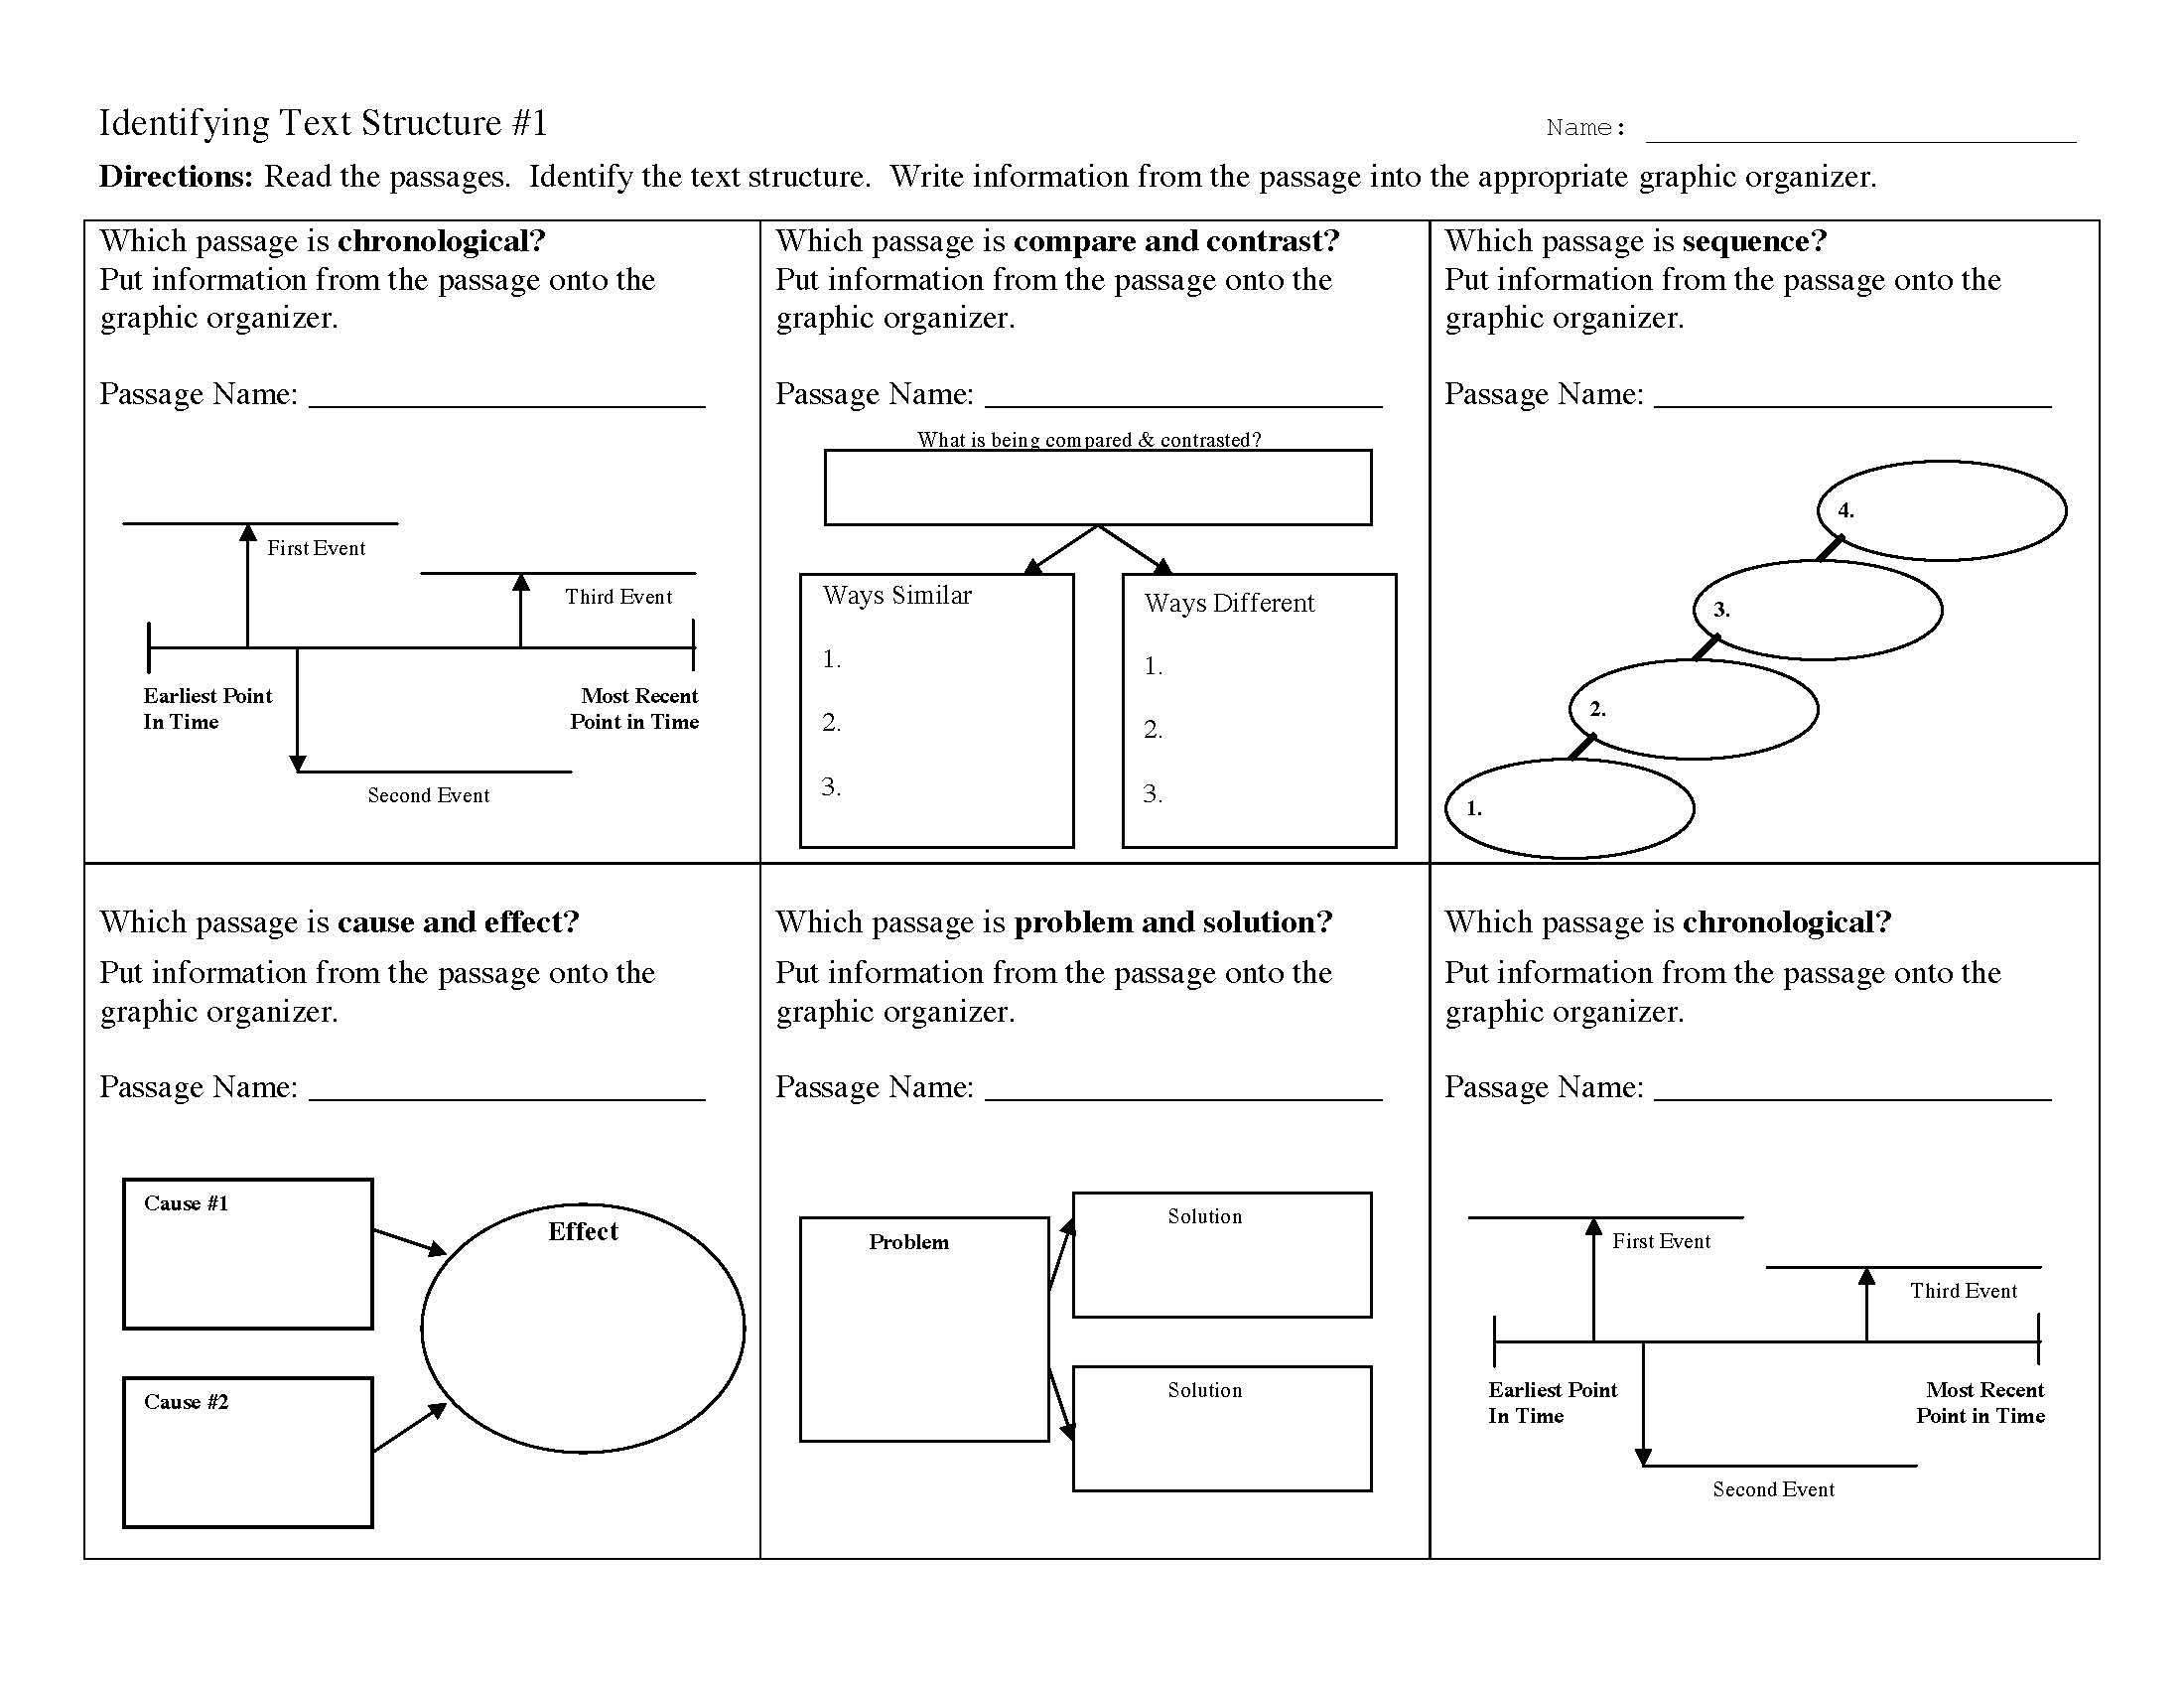 This is a preview image of Text Structure Worksheet 1. Click on it to enlarge it or view the source file.